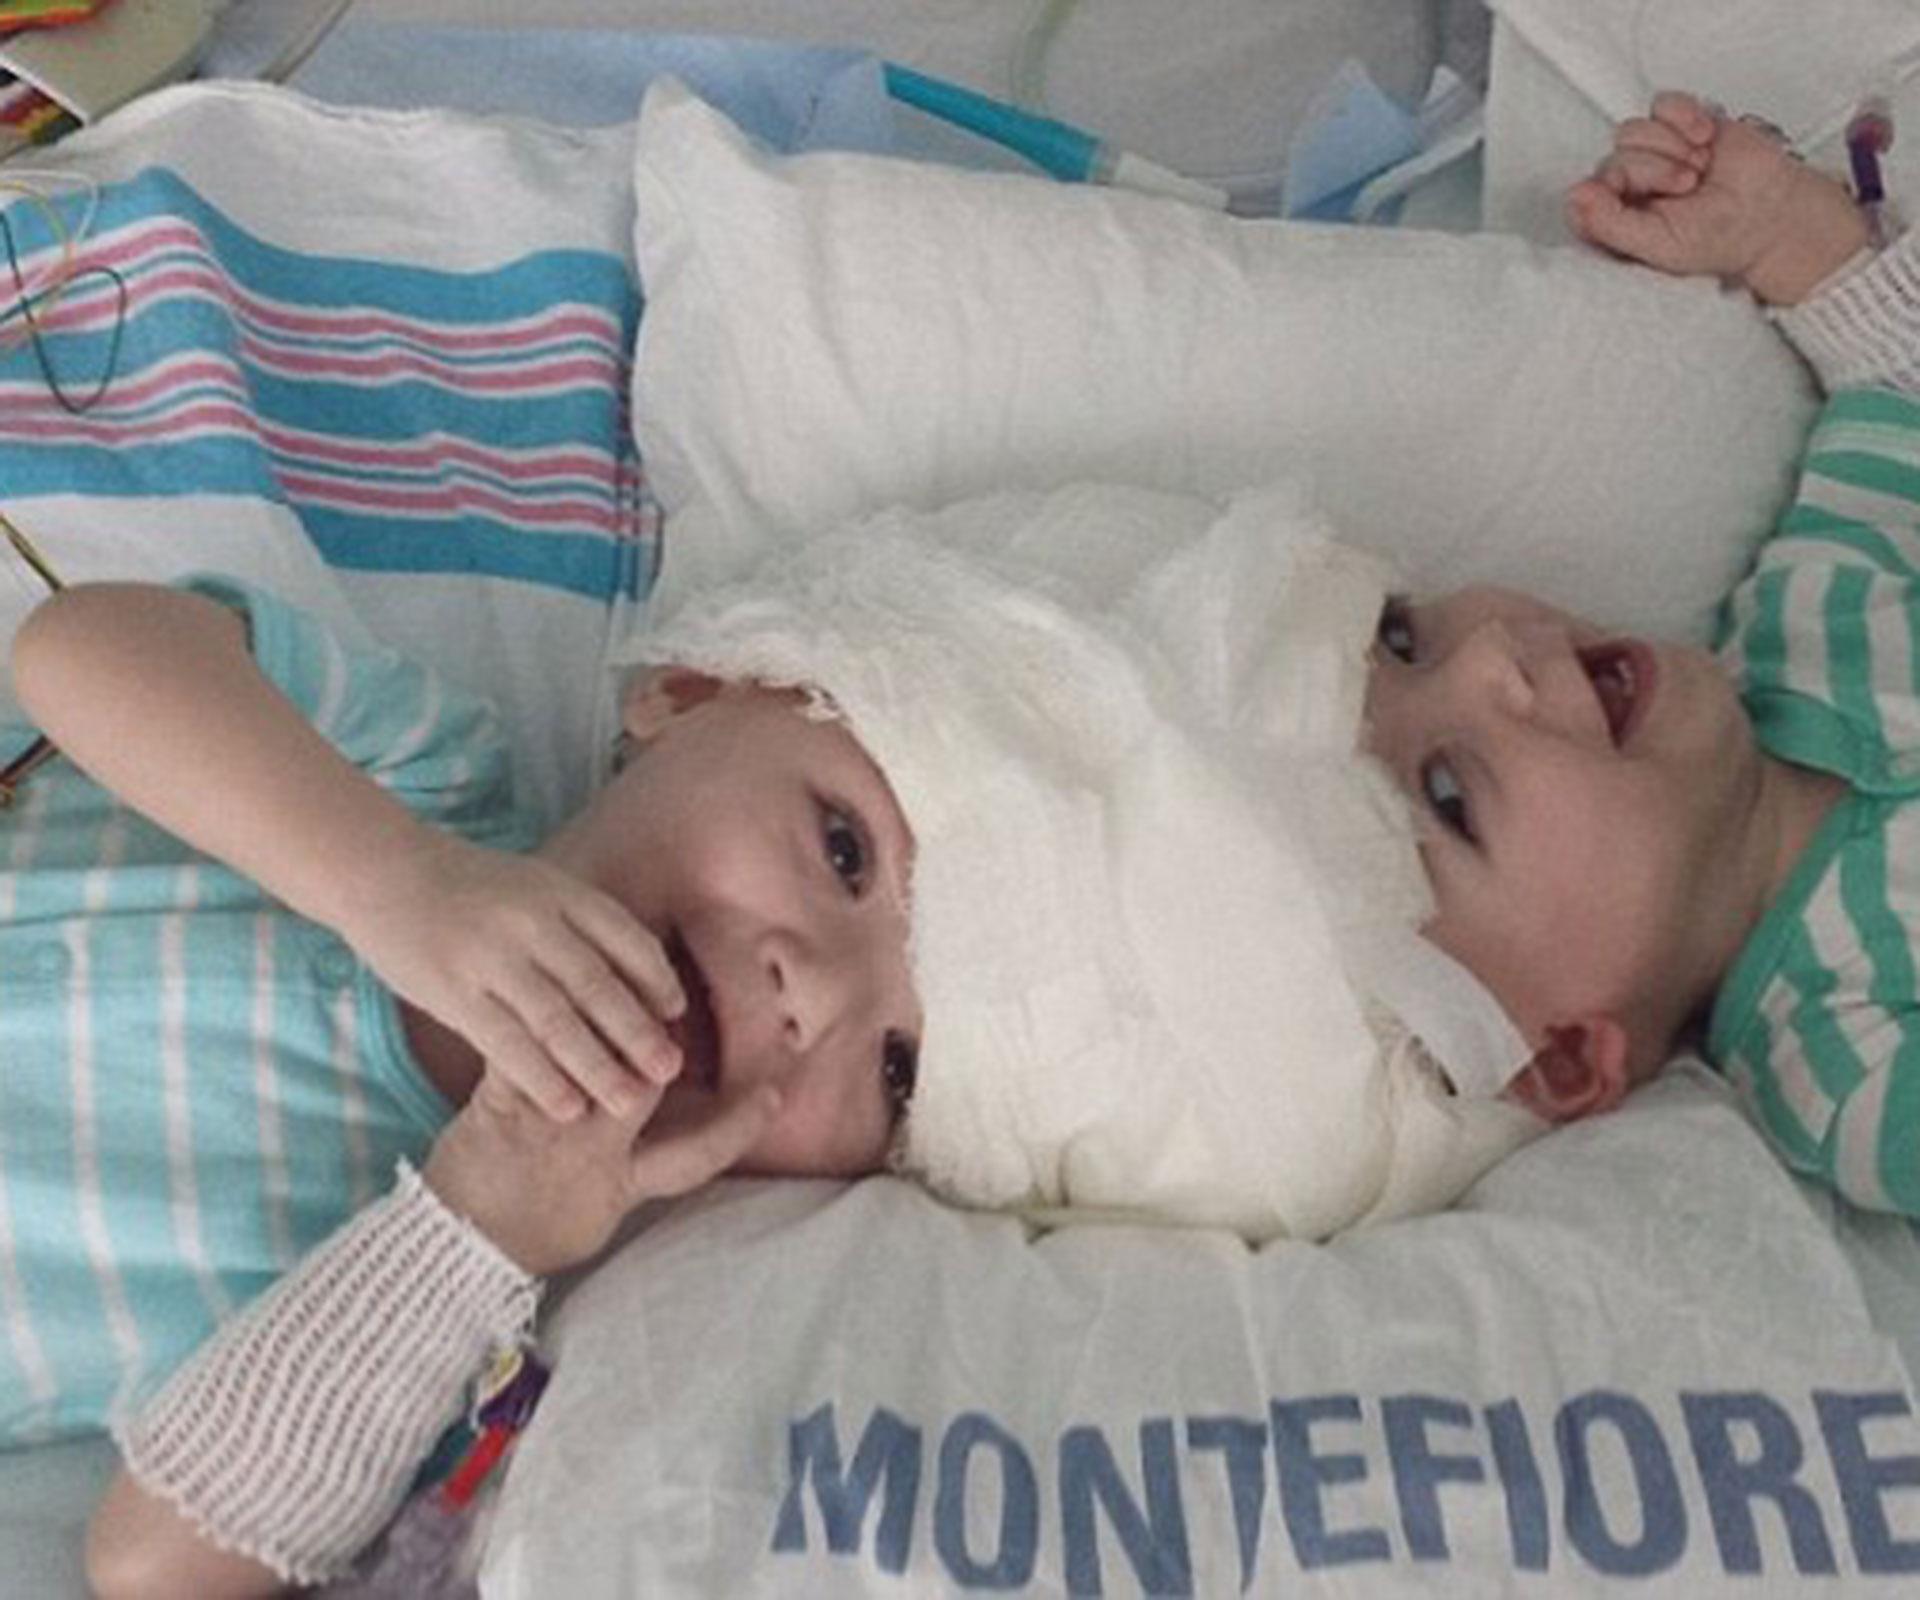 Beautiful moment conjoined twins see each other for the first time since they were separated